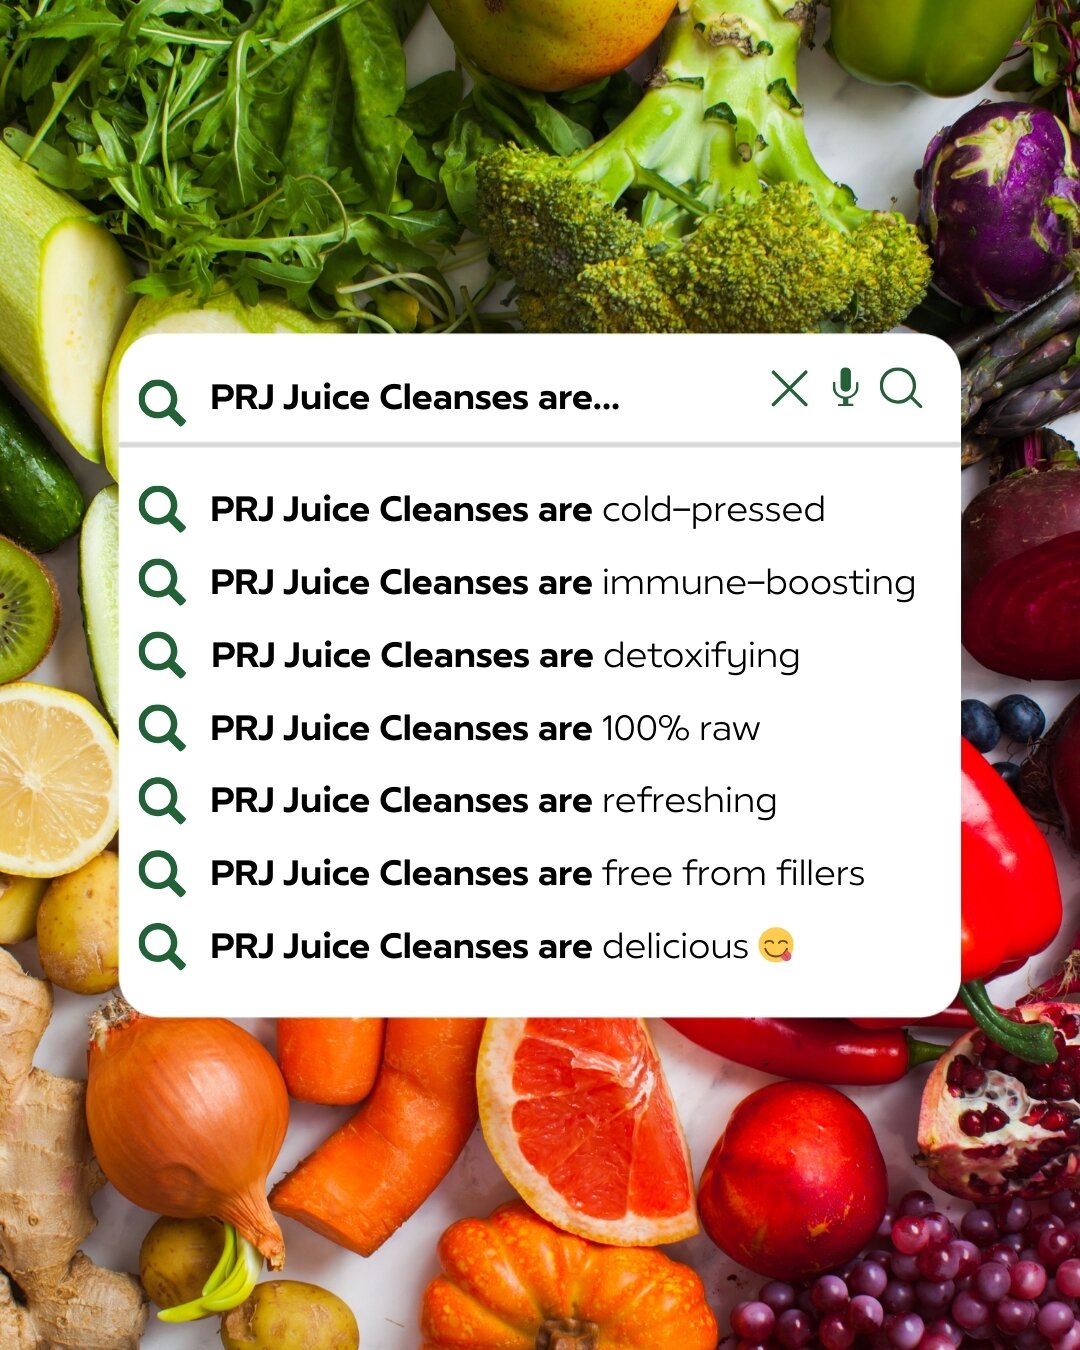 Ready to hit the reset button? 🔄 

Say yes to a PRJ juice cleanse and give your body a VIP treatment! 👏 👏 👏 

Today (2/28) and tomorrow (2/29) are the last two days to take advantage of the juicy deal! When you order a 3-day juice cleanse under @